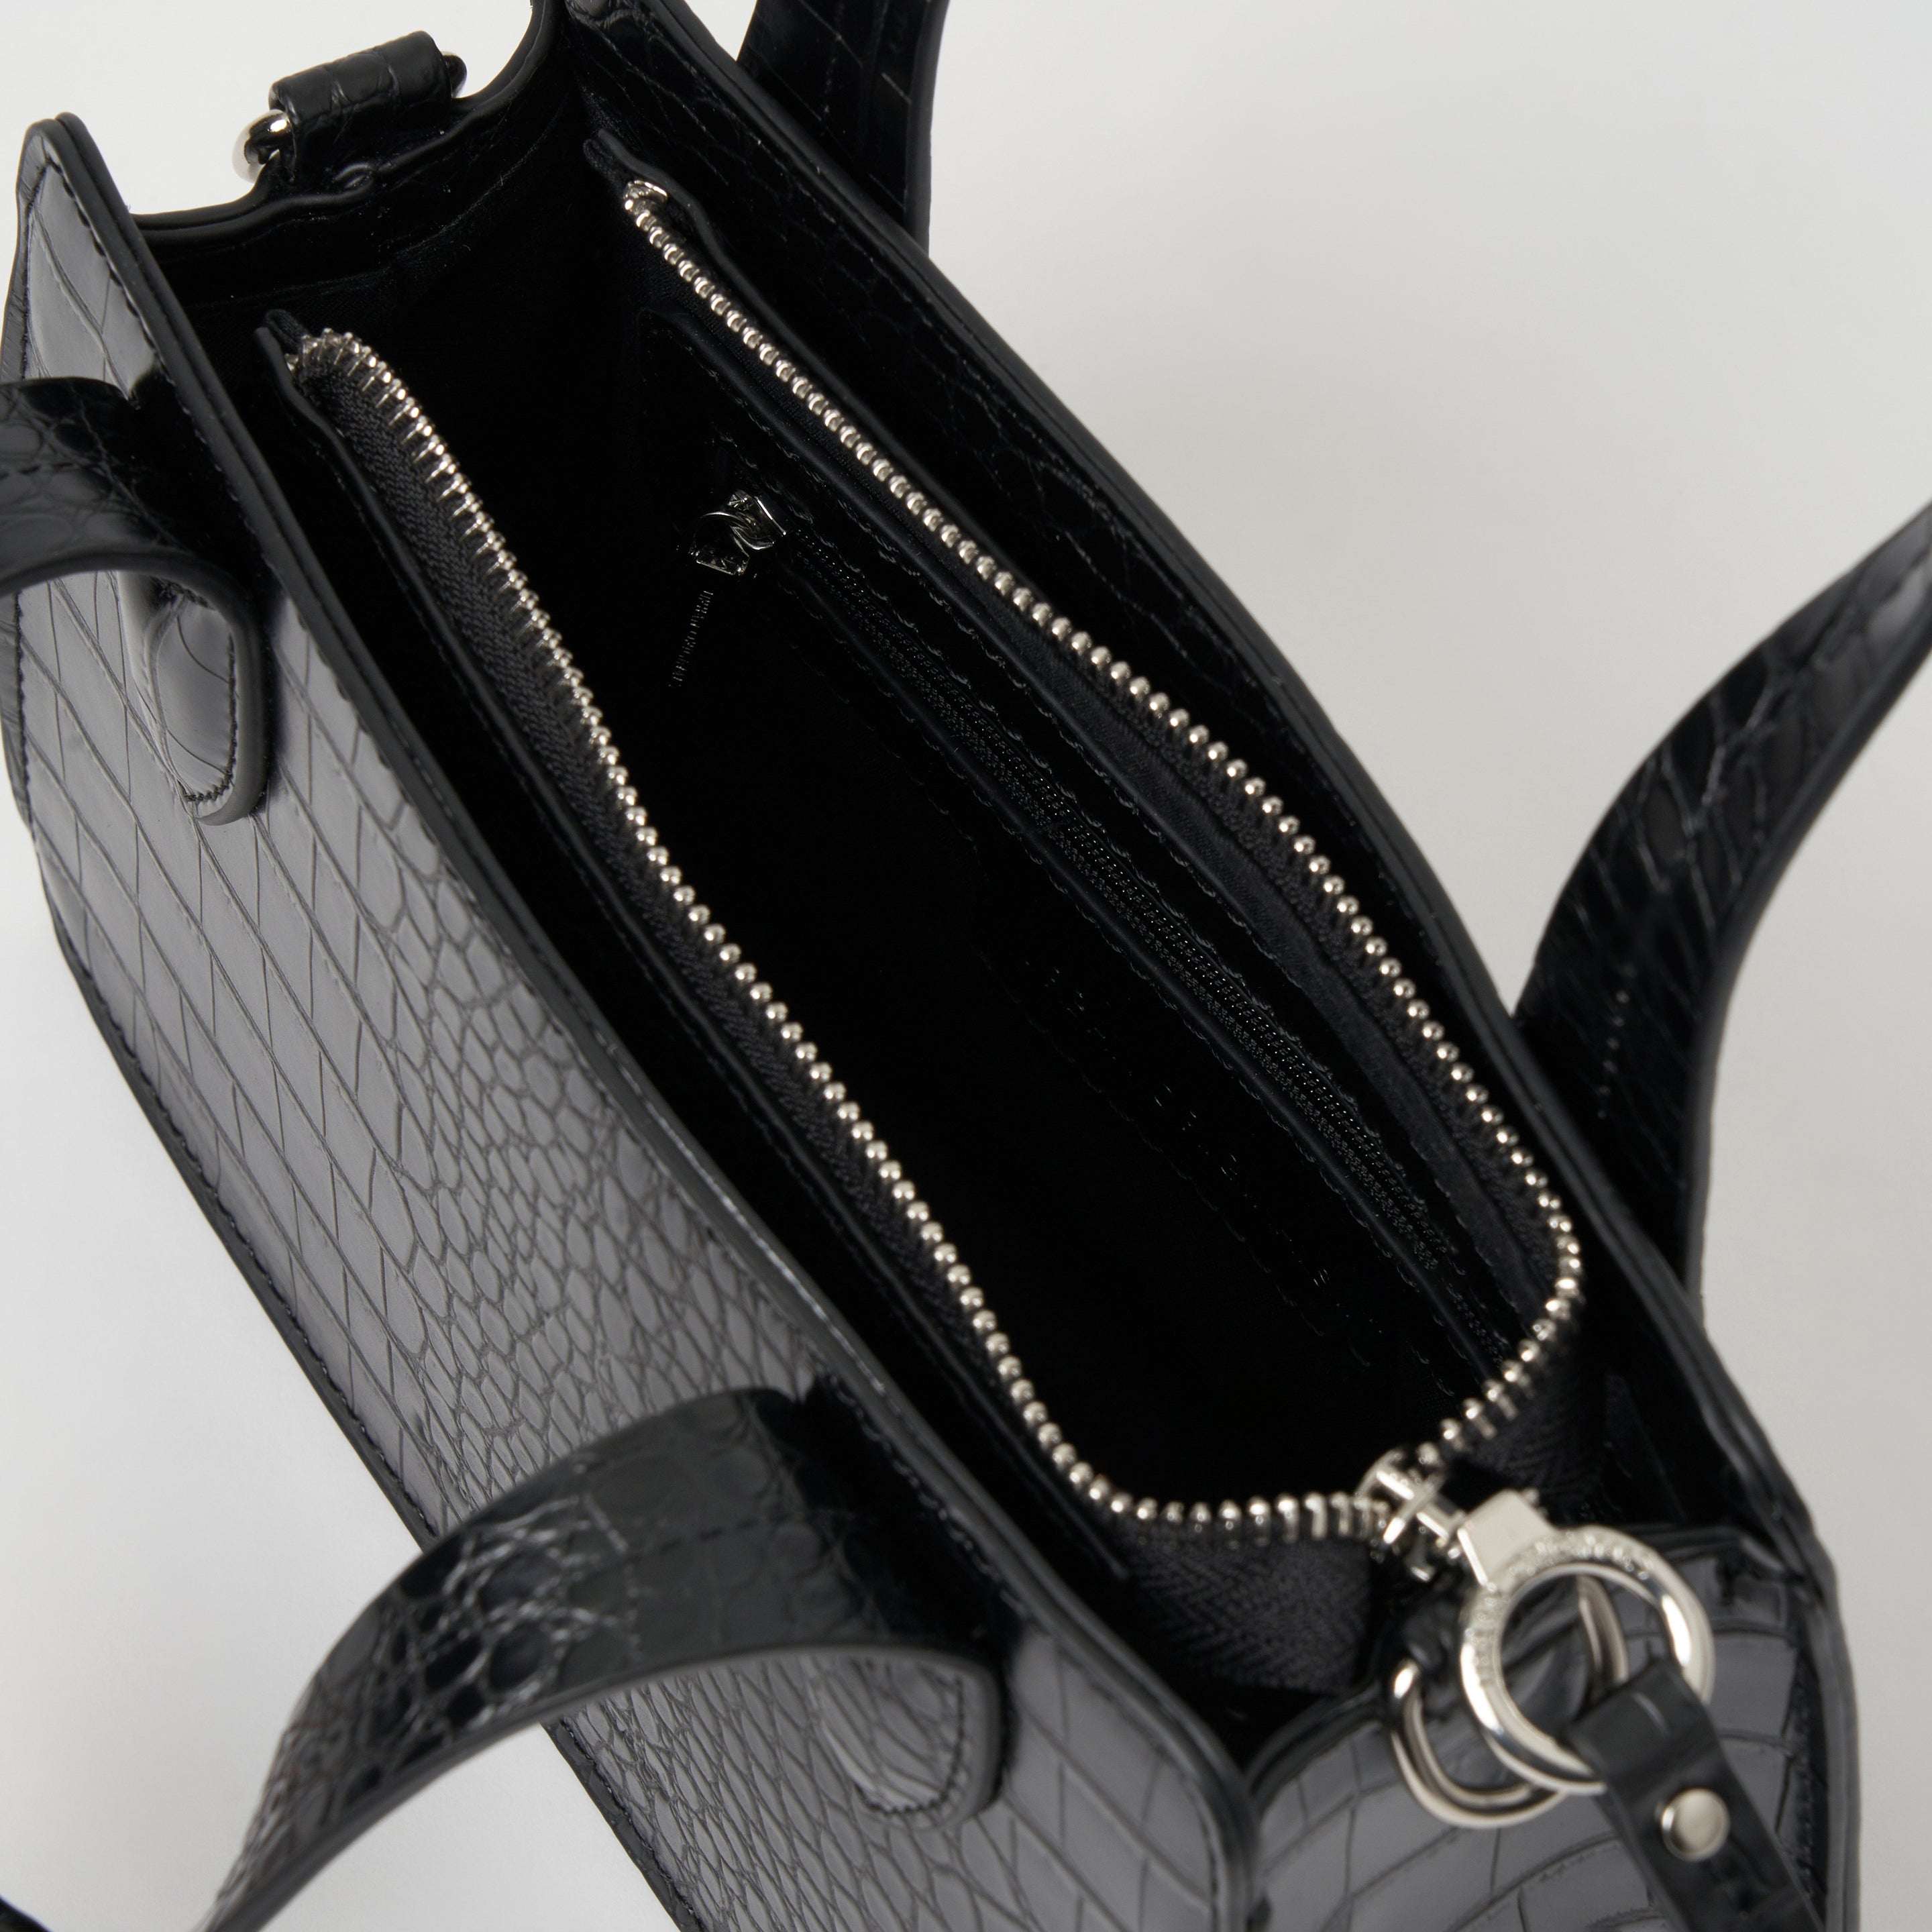 Load image into Gallery viewer, August Crossbody - Black
